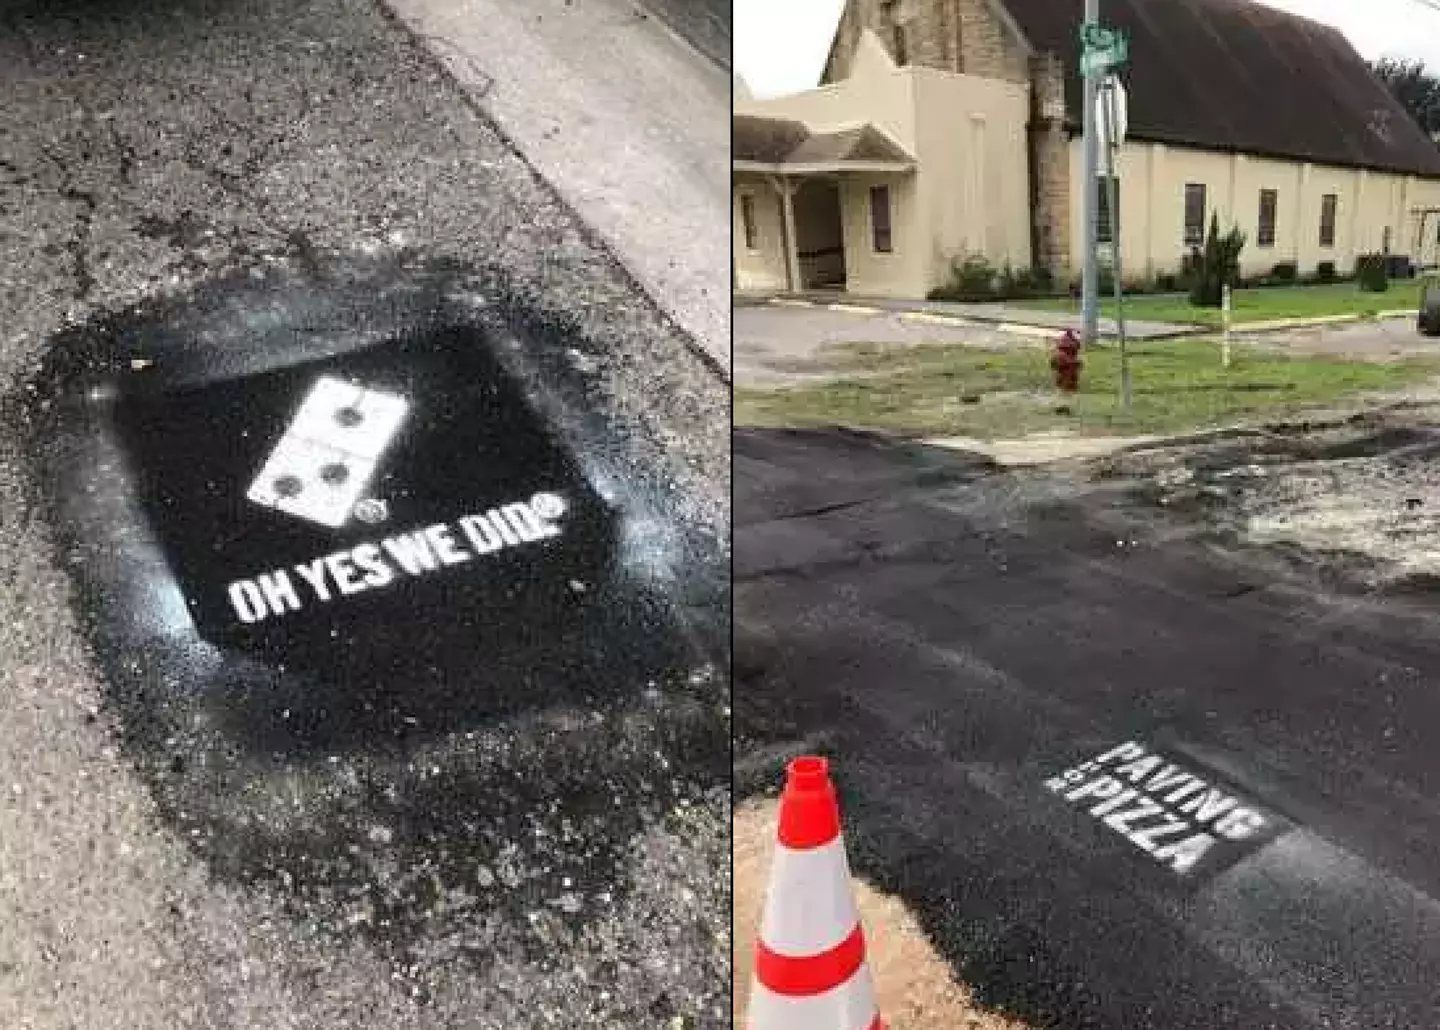 Some of the potholes were branded with the Domino's logo.